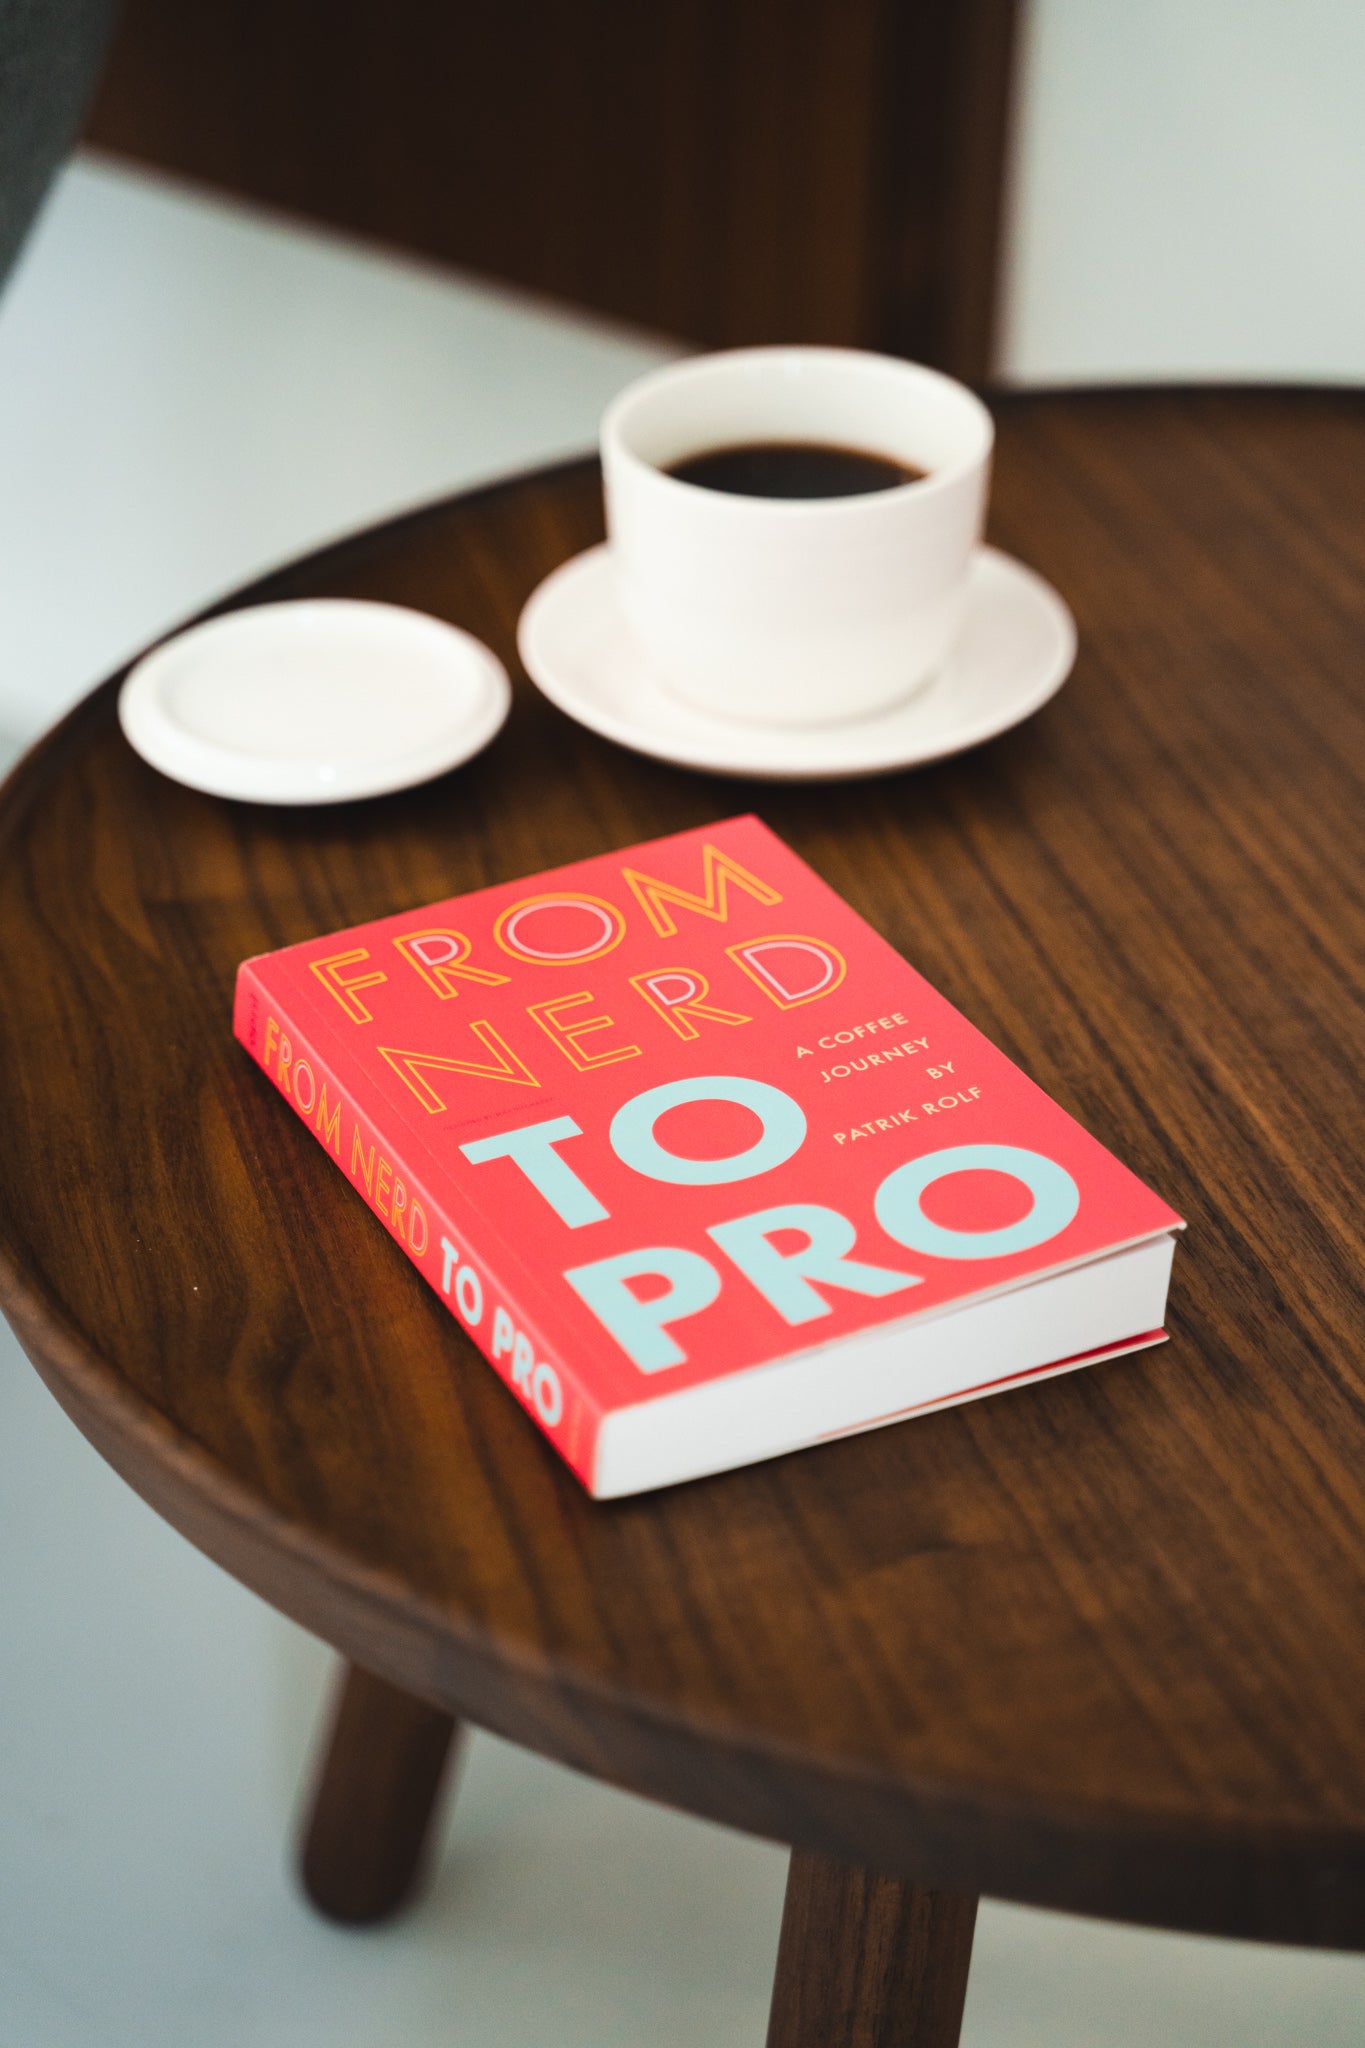 From Nerd To Pro - A Coffee Journey by Patrik Rolf — April Coffee 